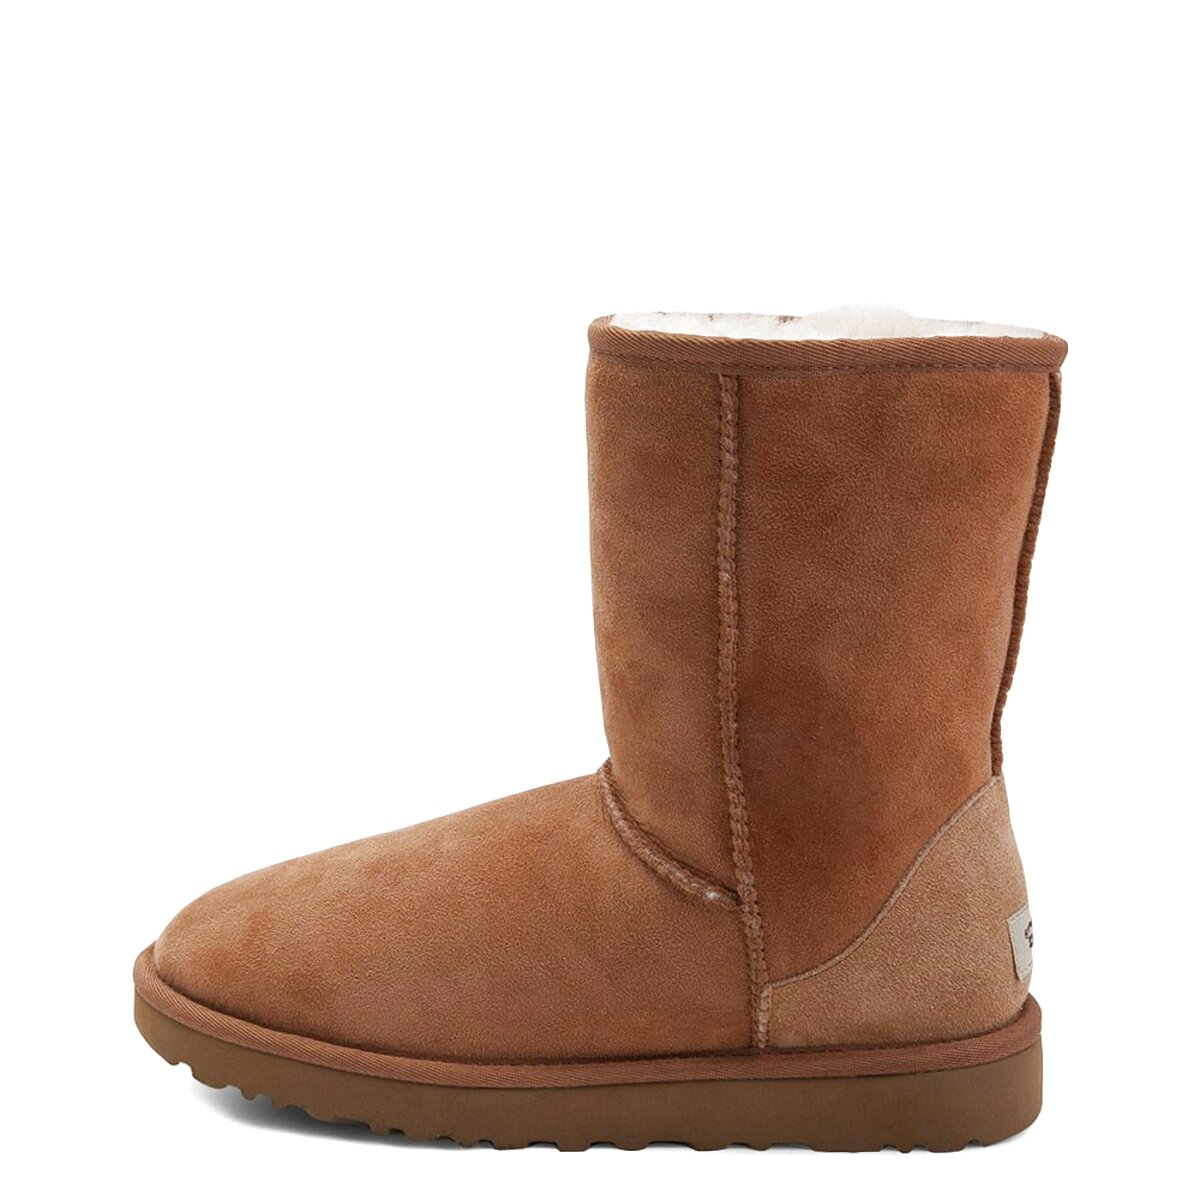 Hug Boots for sale in UK | 51 used Hug Boots